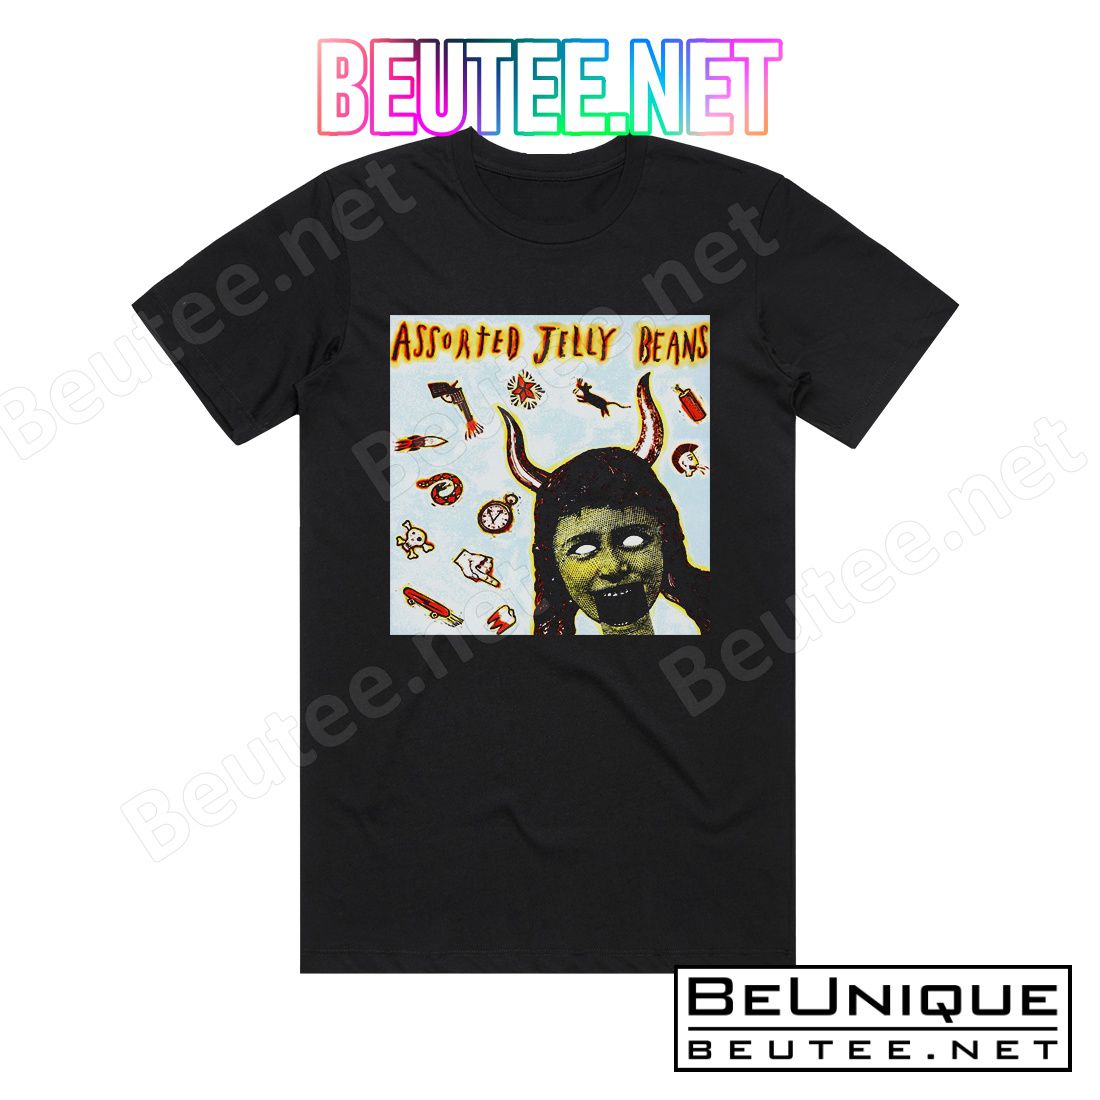 Assorted Jelly Beans Assorted Jelly Beans Album Cover T-Shirt